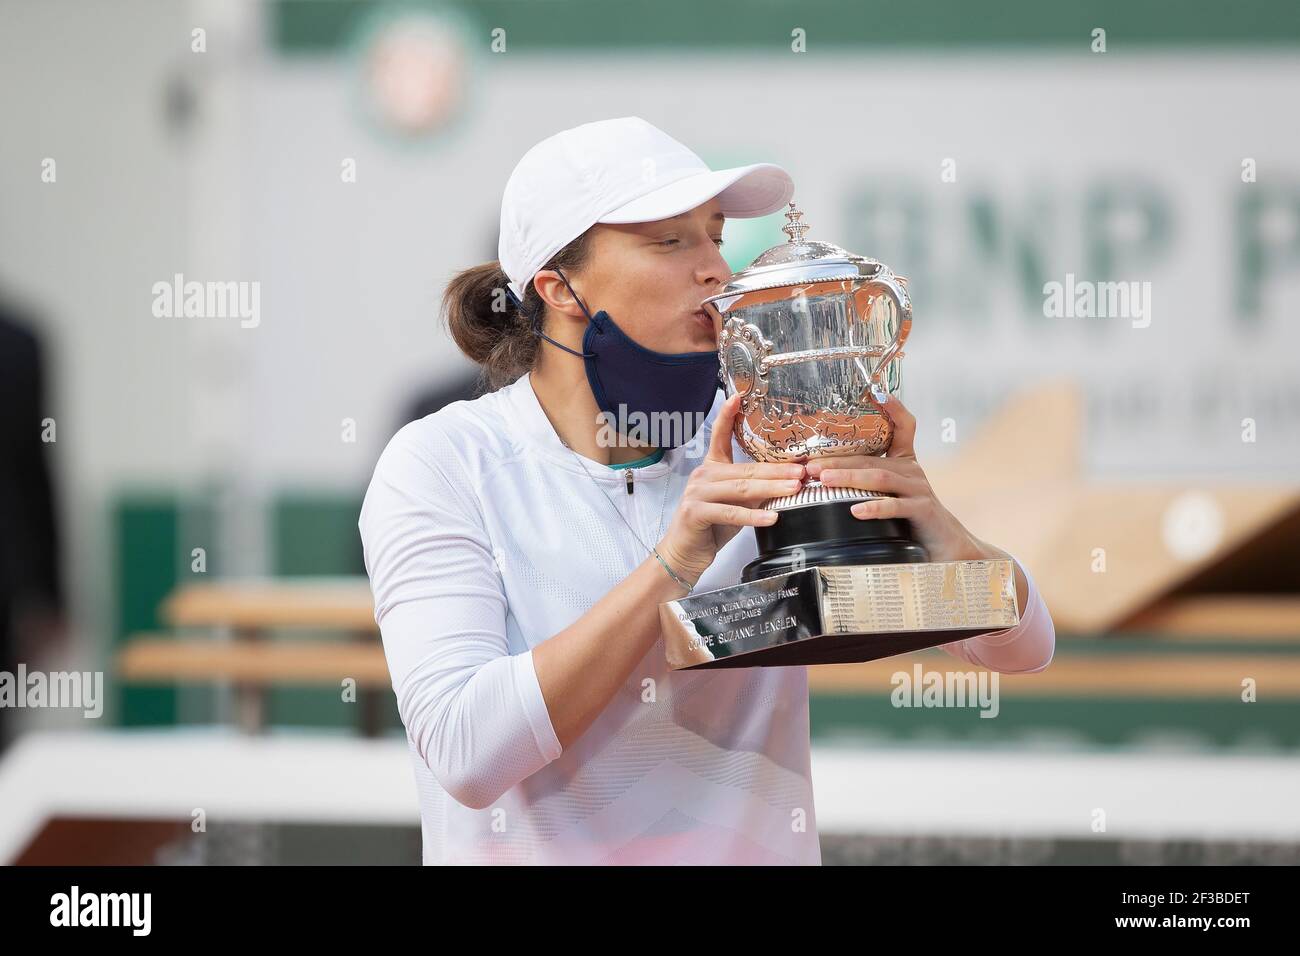 Polish tennis player Iga Swiatek kissing her trophy at the French Open 2020 tournament, Paris, France. Stock Photo